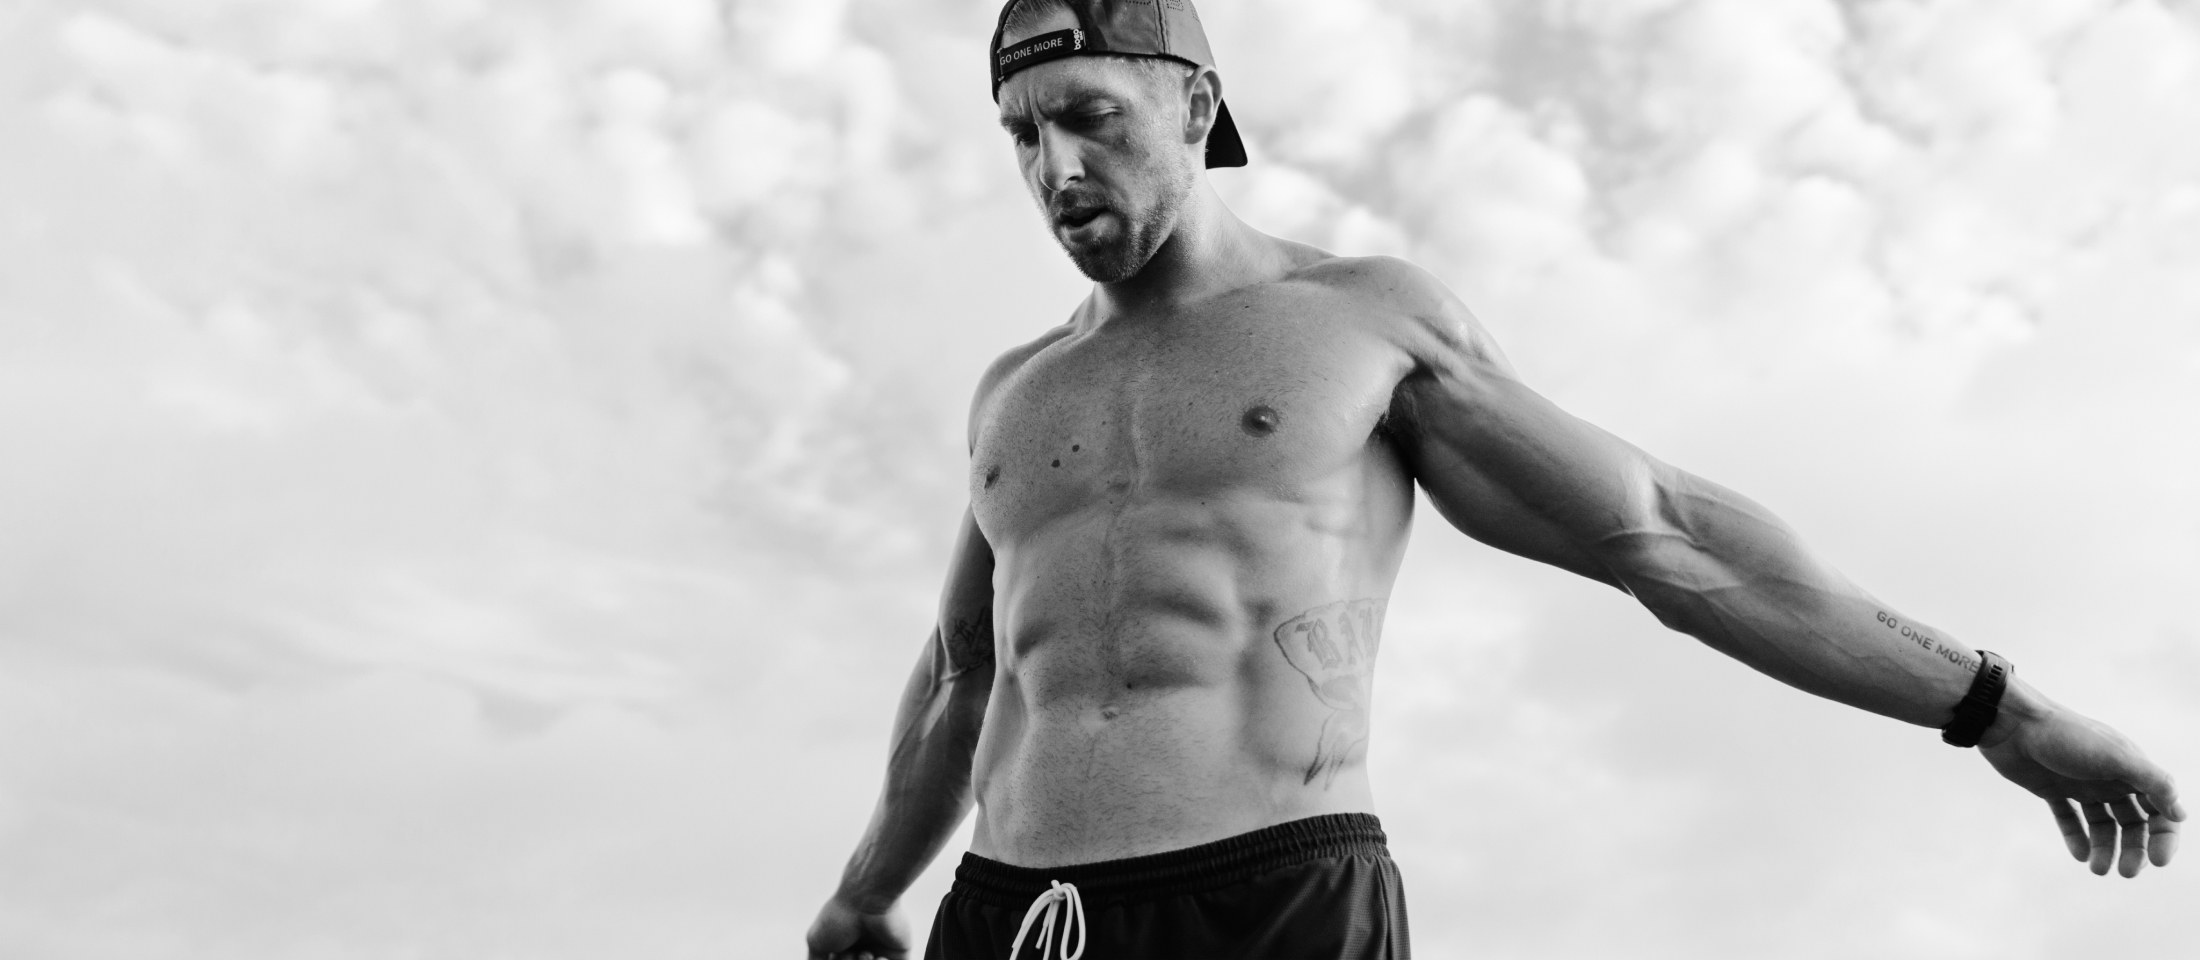 About Nick Bare - Founder of Bare Performance Nutrition